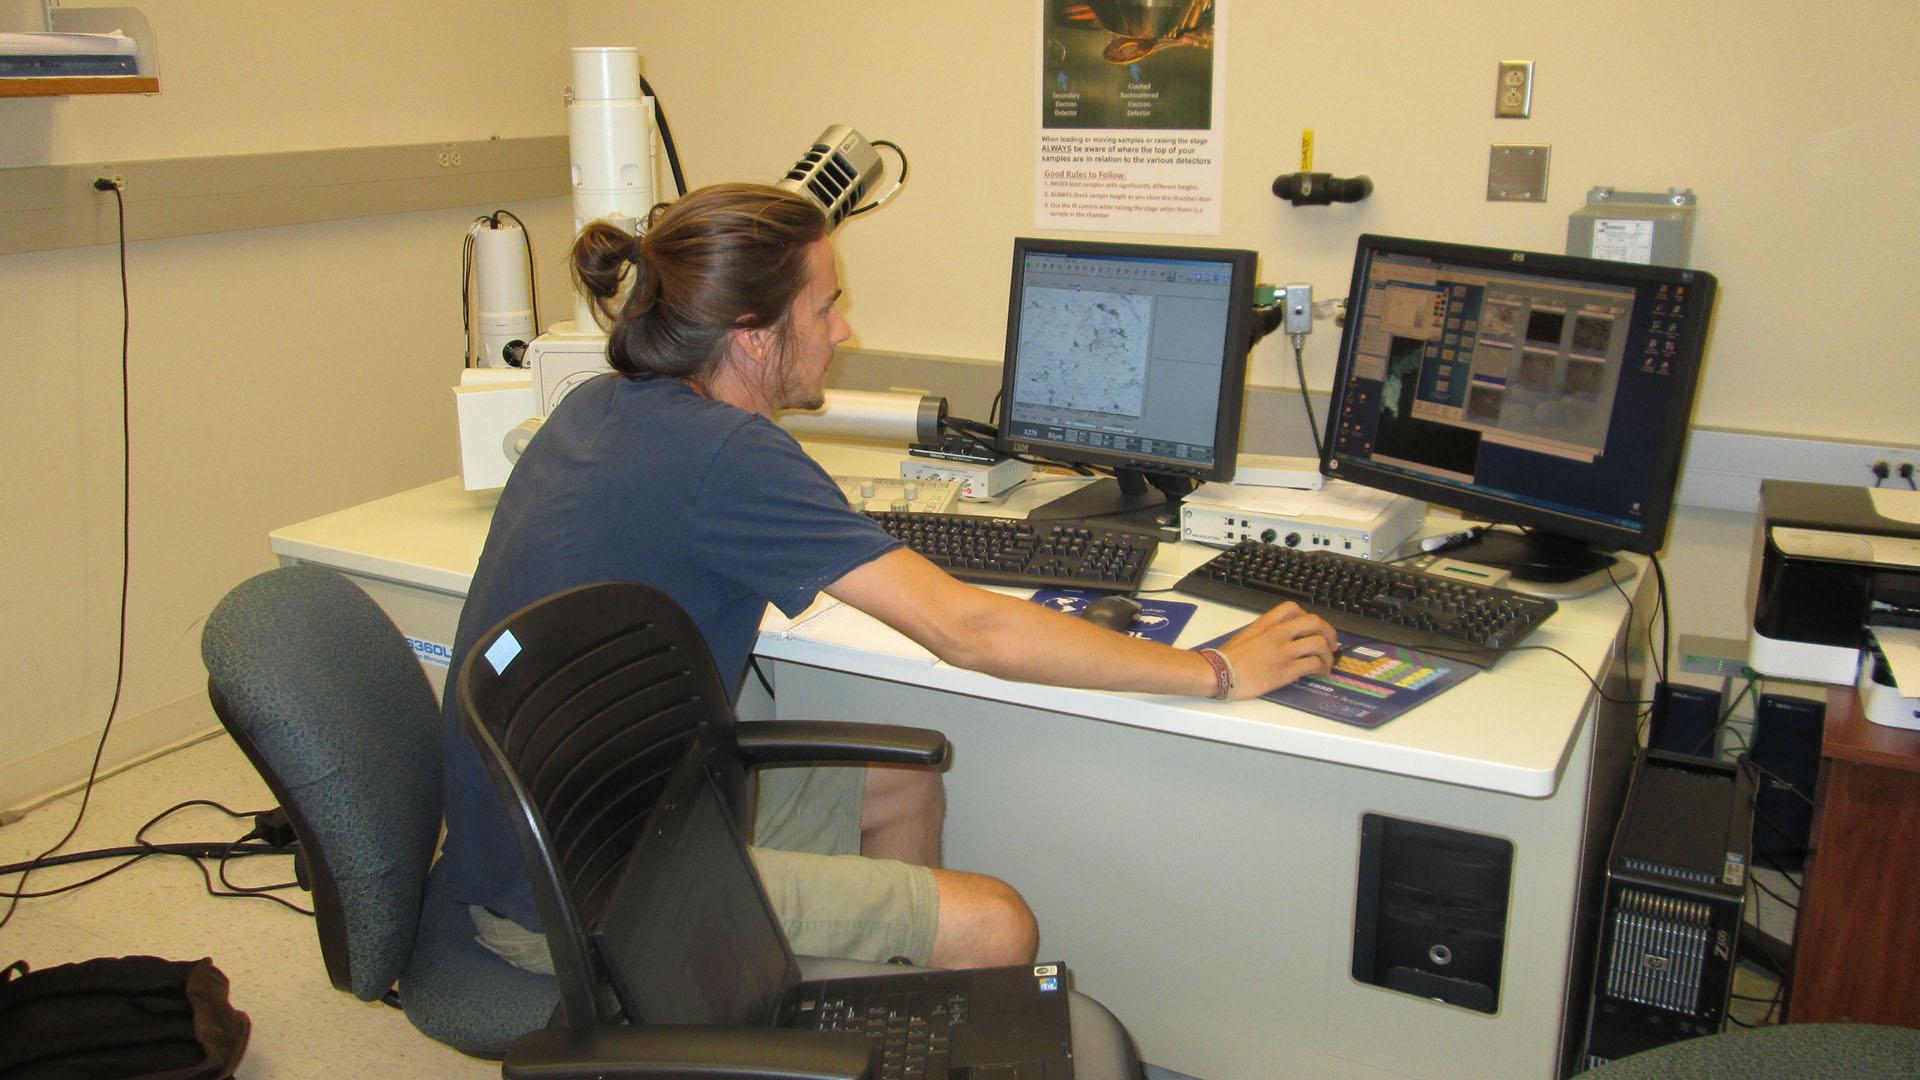 Student using electron microscope in lab.